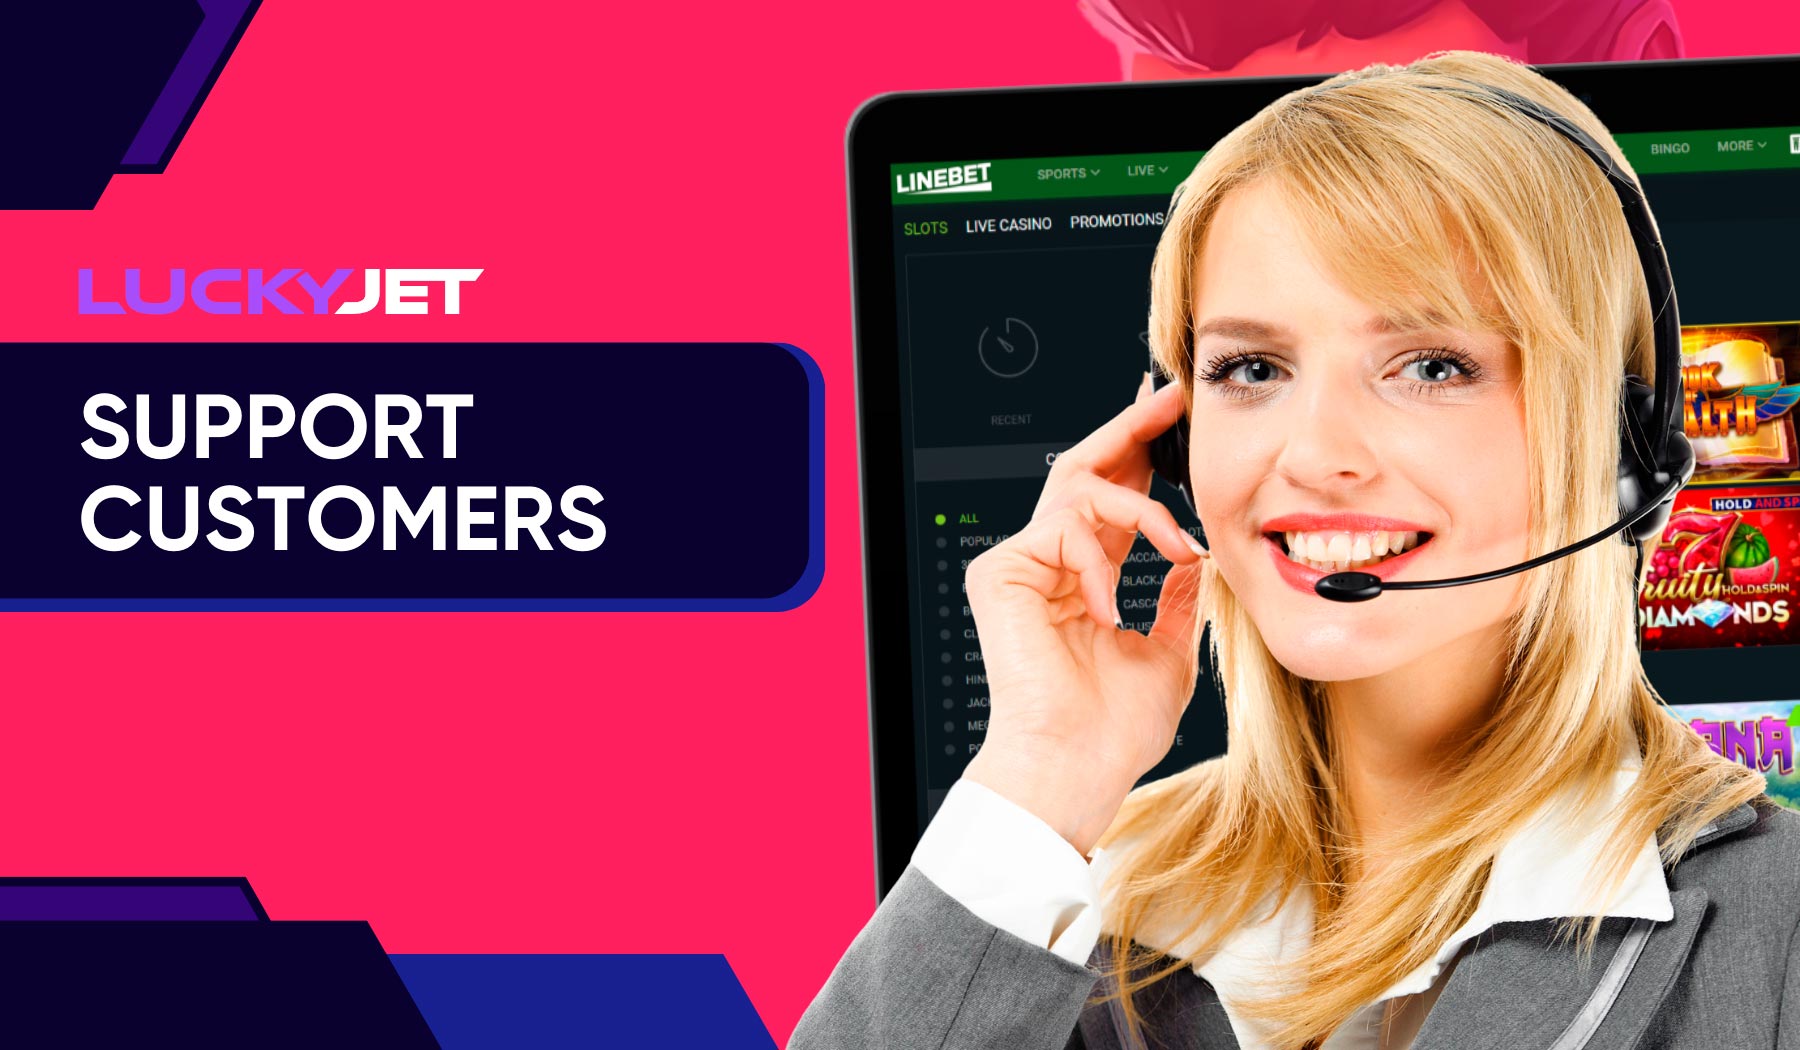 Lucky Jet at Linebet also focuses on excellent customer service